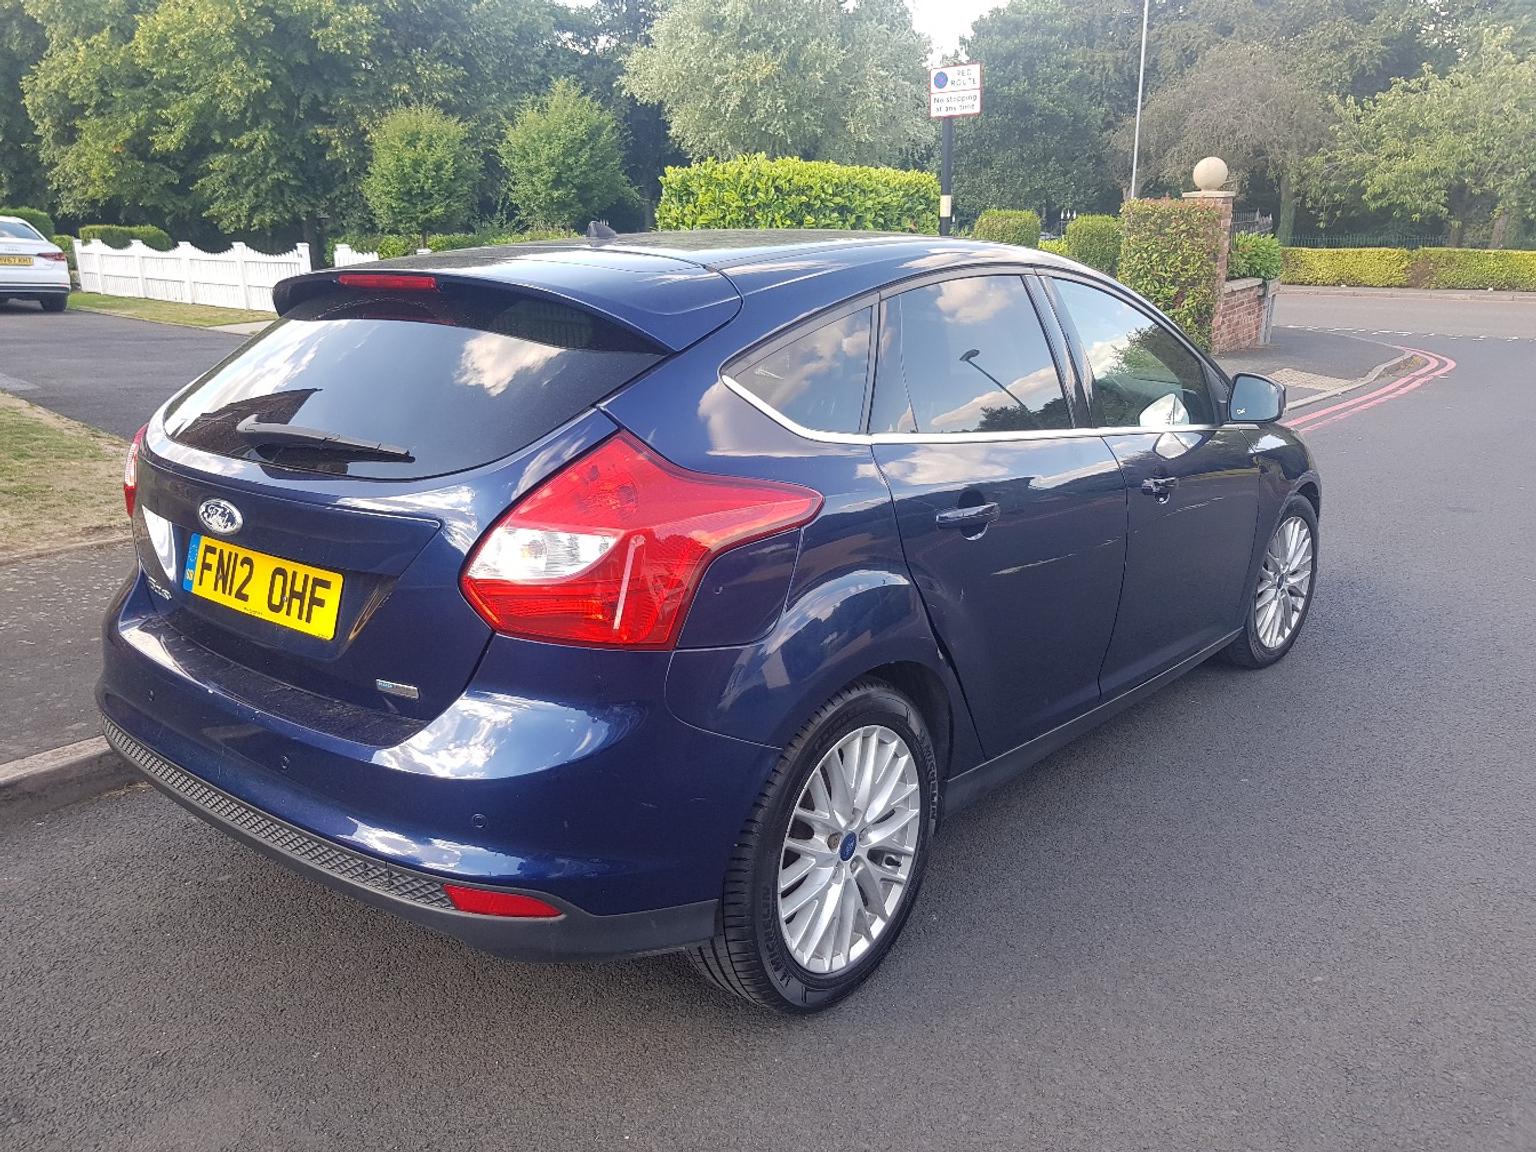 FORD FOCUS ZETEC 1.6 TDCI in WS2 Walsall for £2,795.00 for